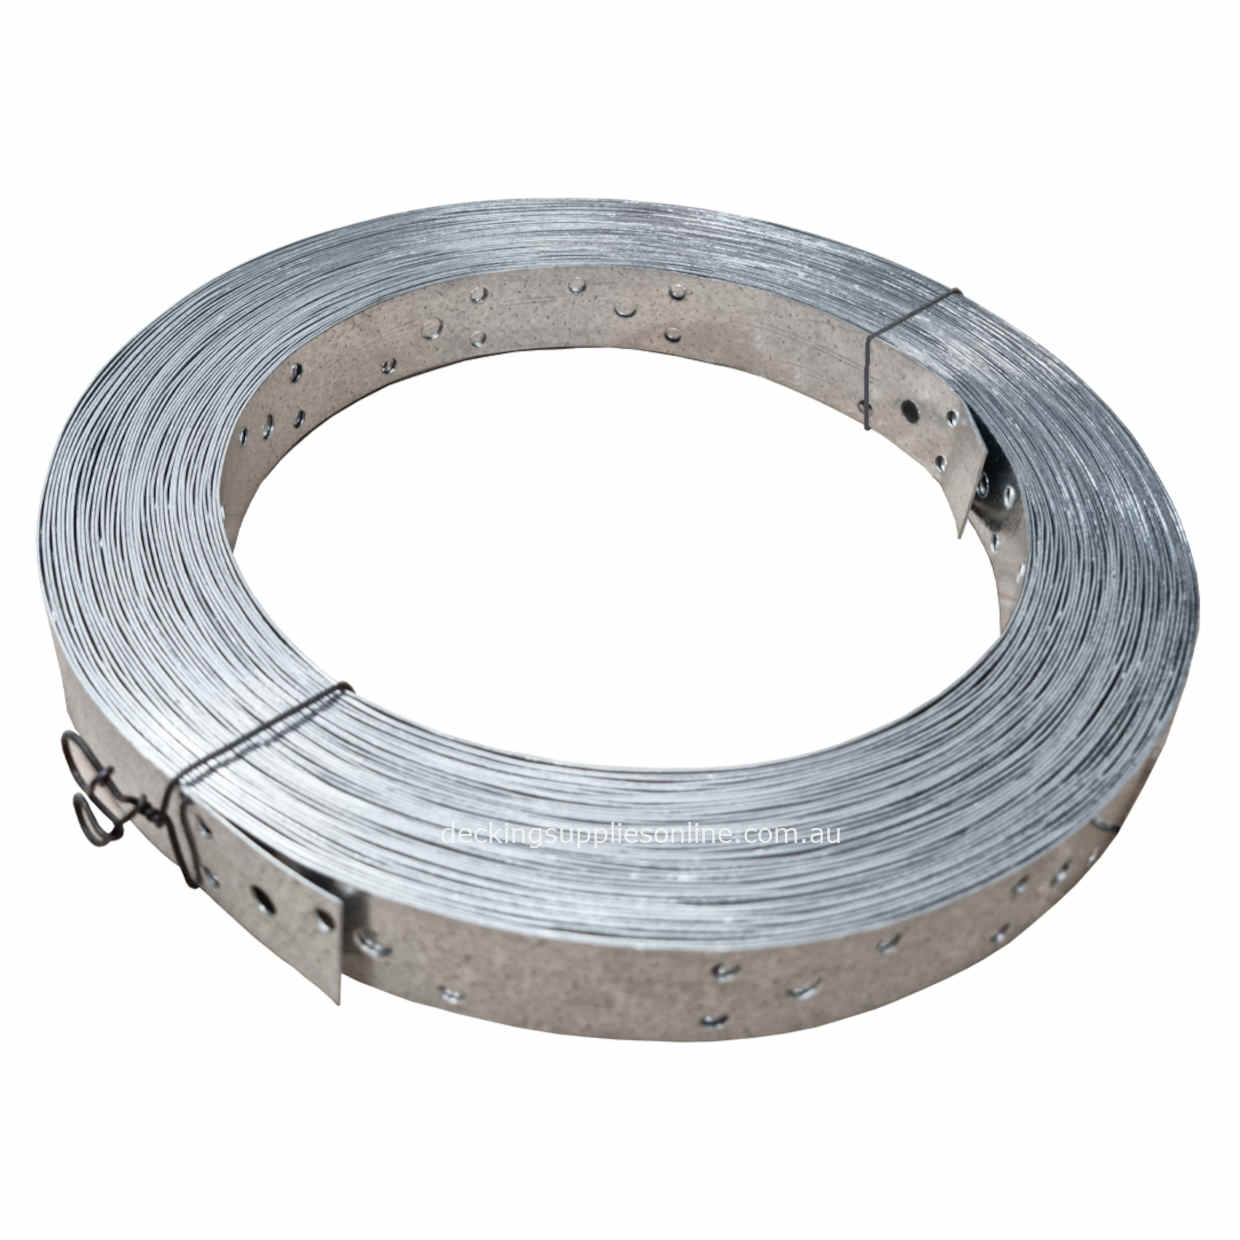 MAXI_METAL_Hoop_Iron_Strapping_30_0.8_30m_Decking_Supplies_Online